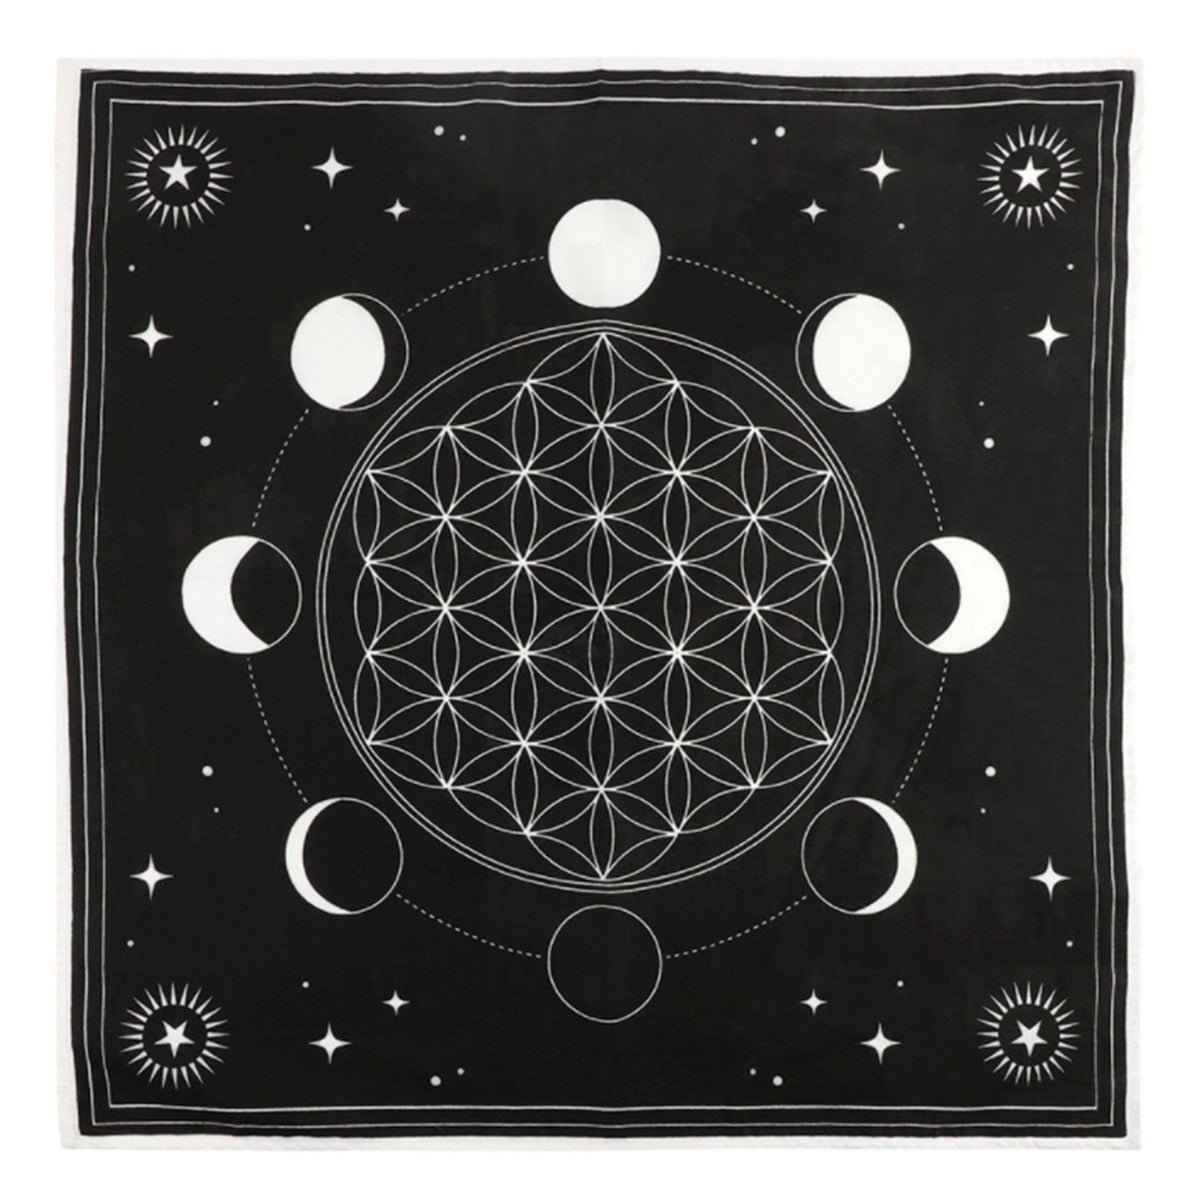 Moon Phase Altar Cloth 27.5 inches - 13 Moons